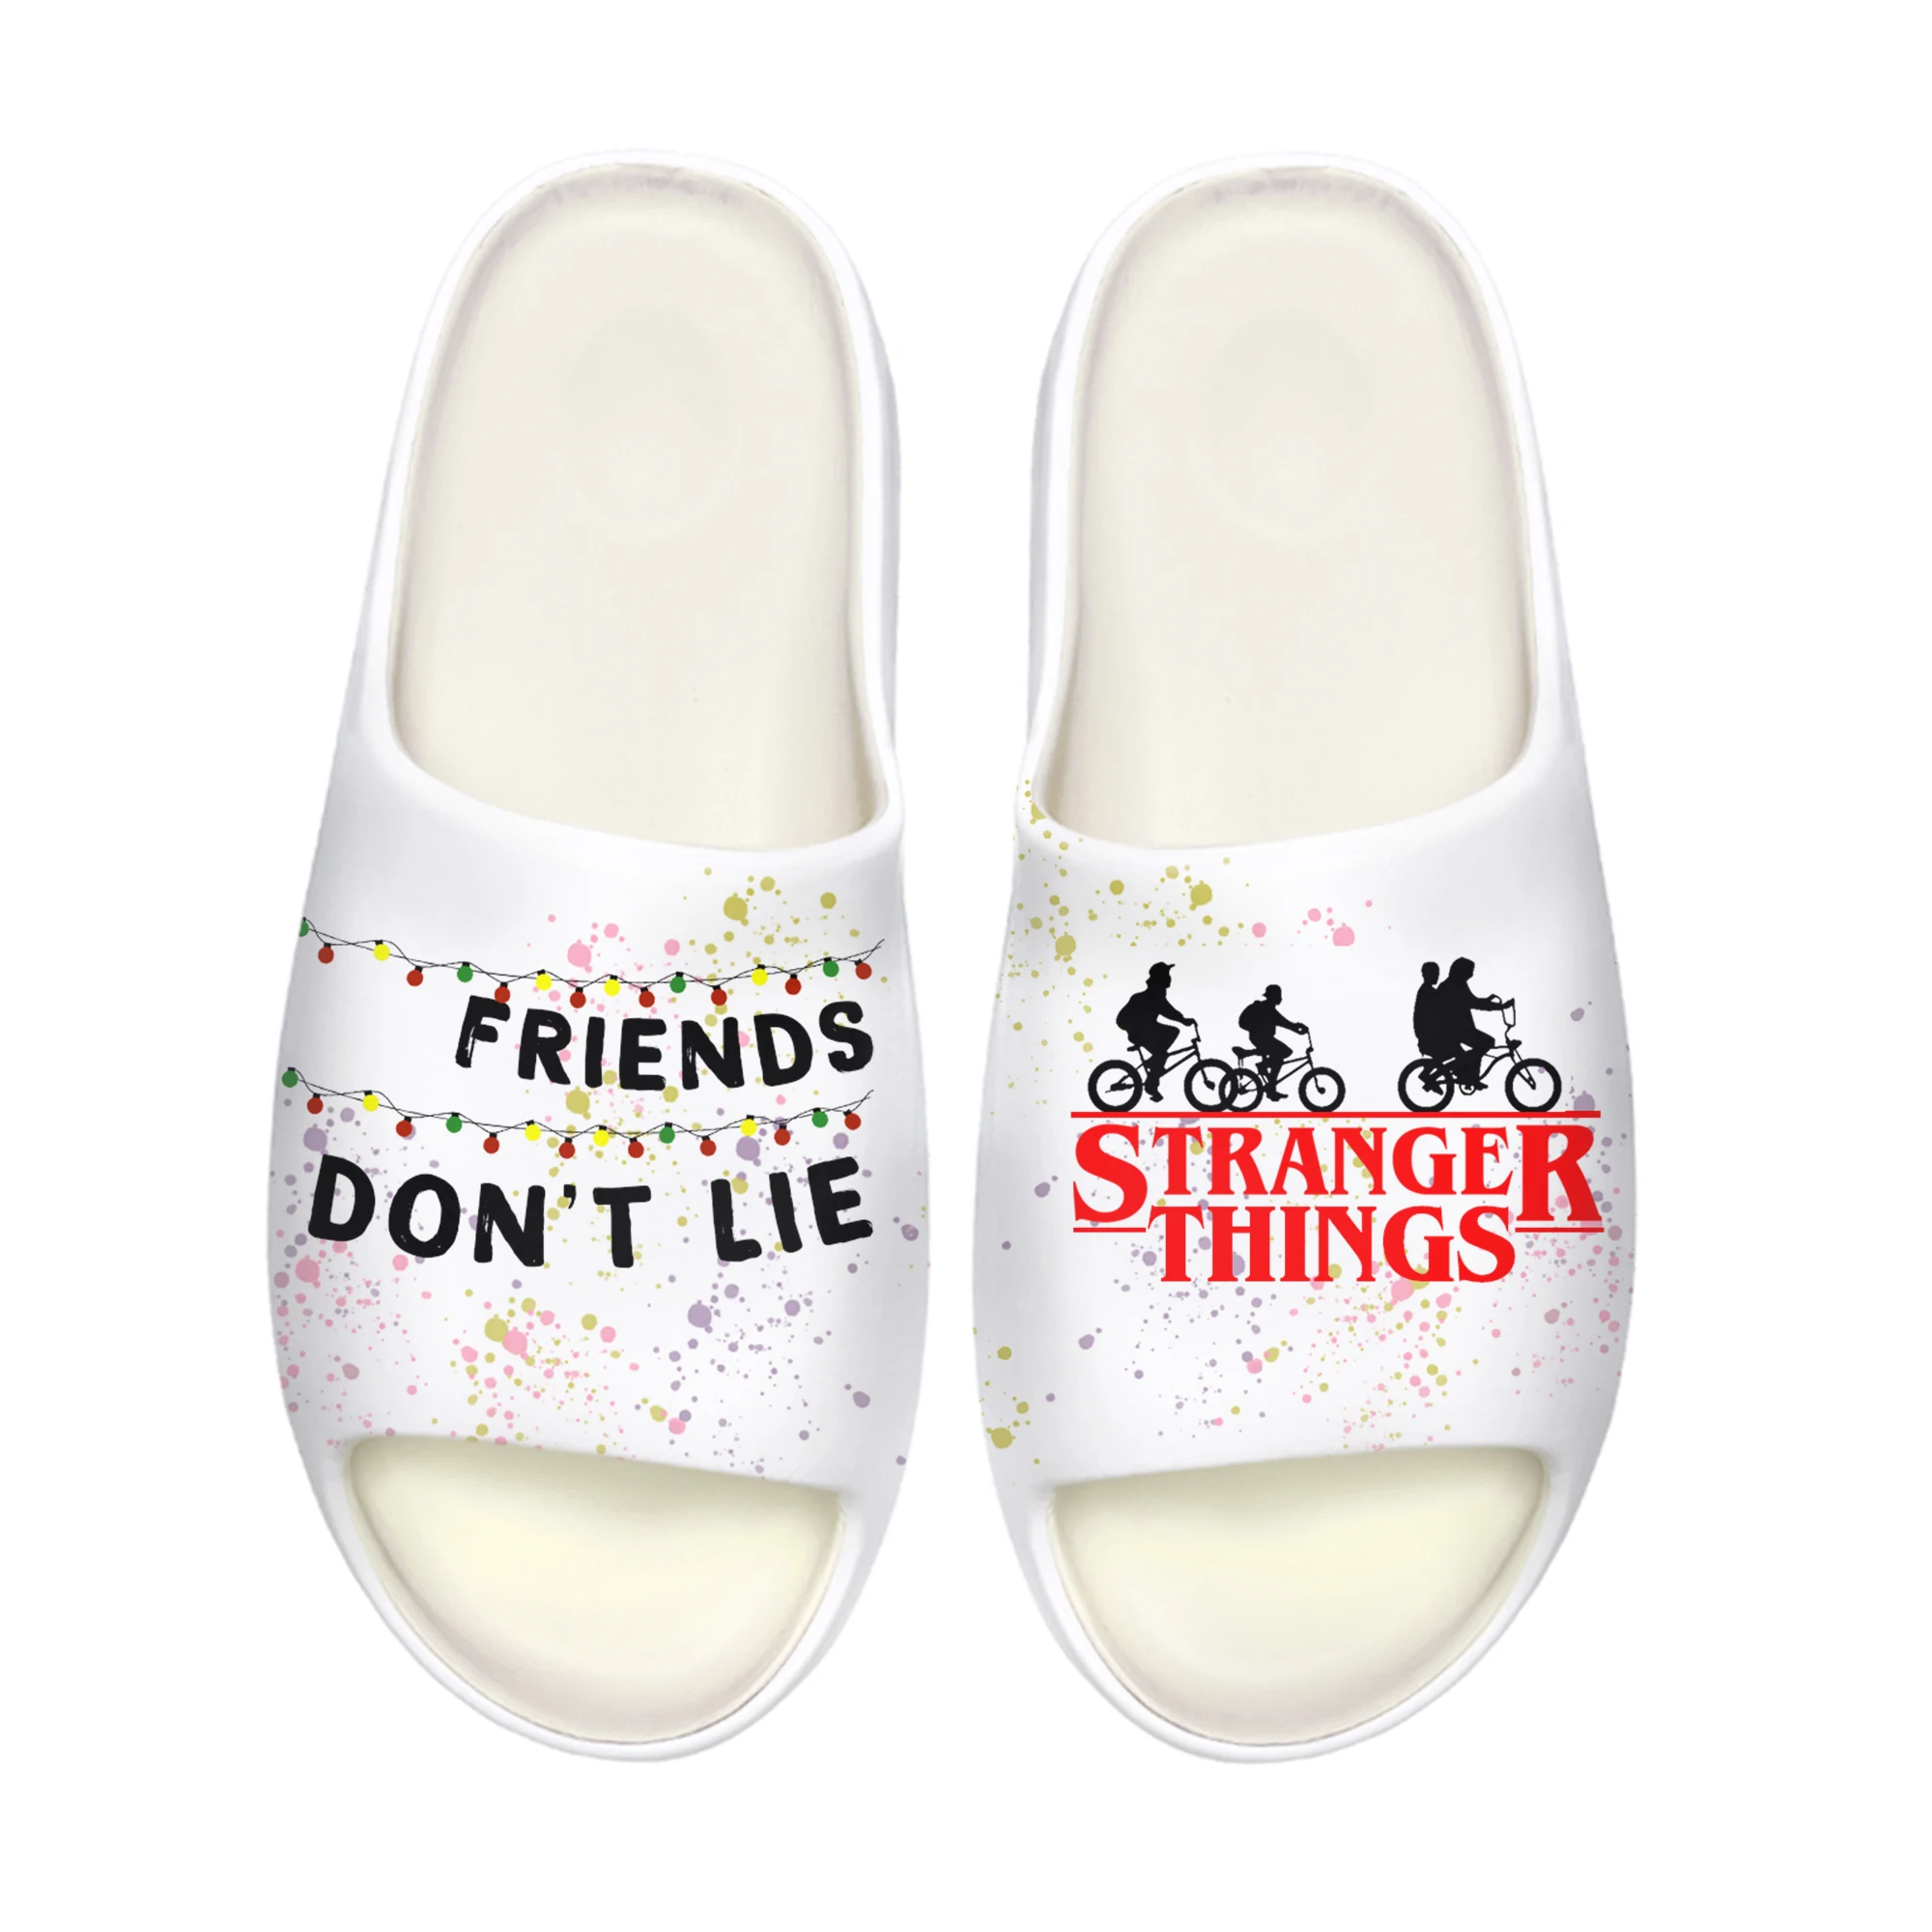 

Stranger Things Soft Sole Sllipers Home Clogs Friends Don't Lie Customized Water Shoes Men Women Teenager Step On Shit Sandals